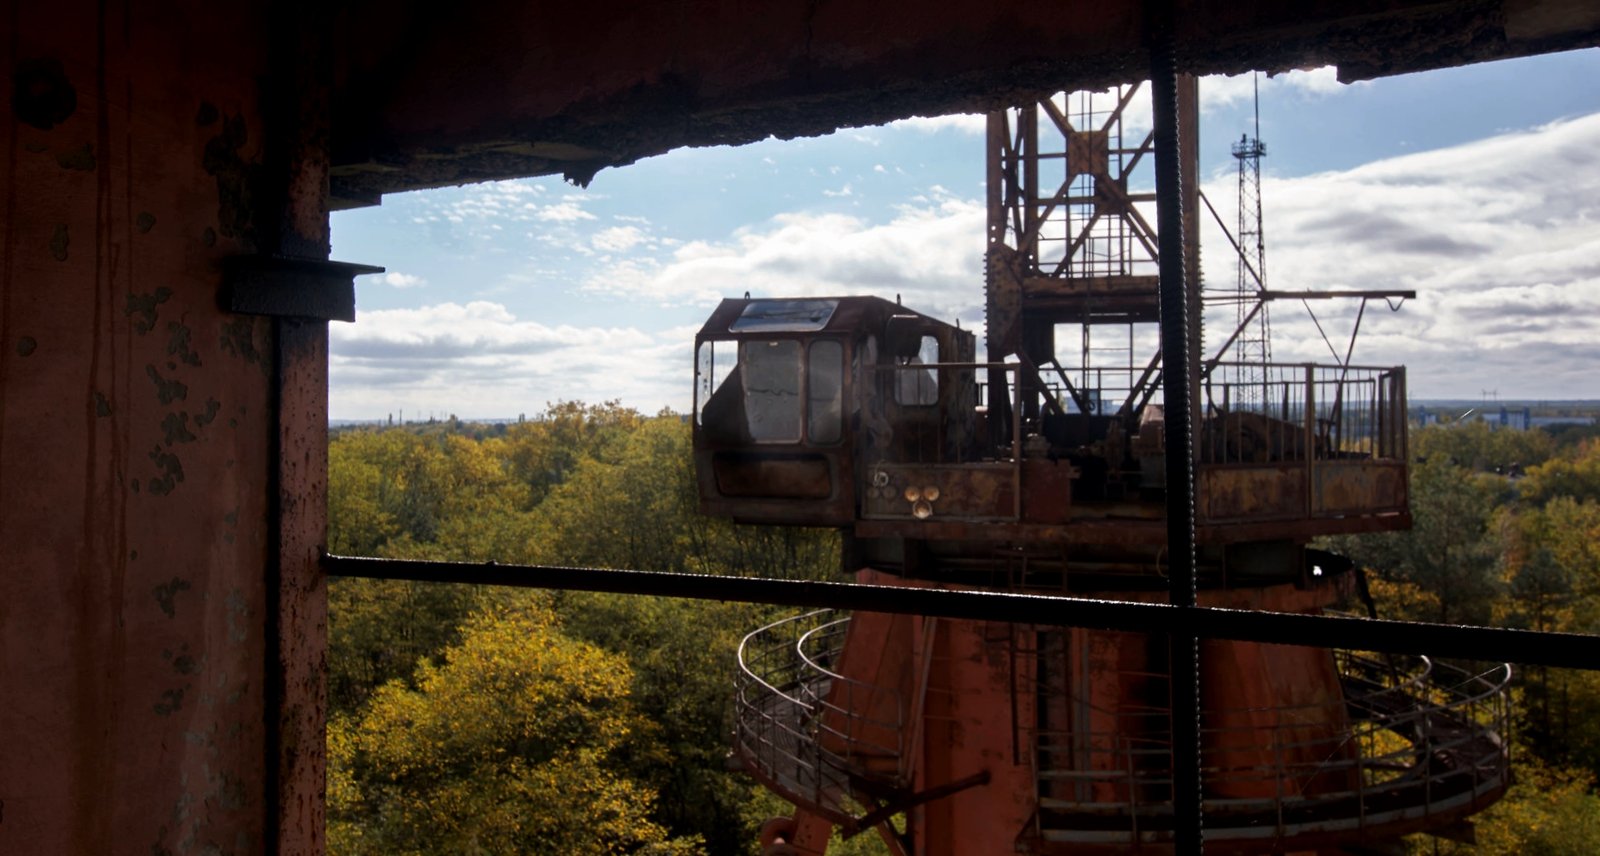 How to climb onto the abandoned port crane in Chernobyl